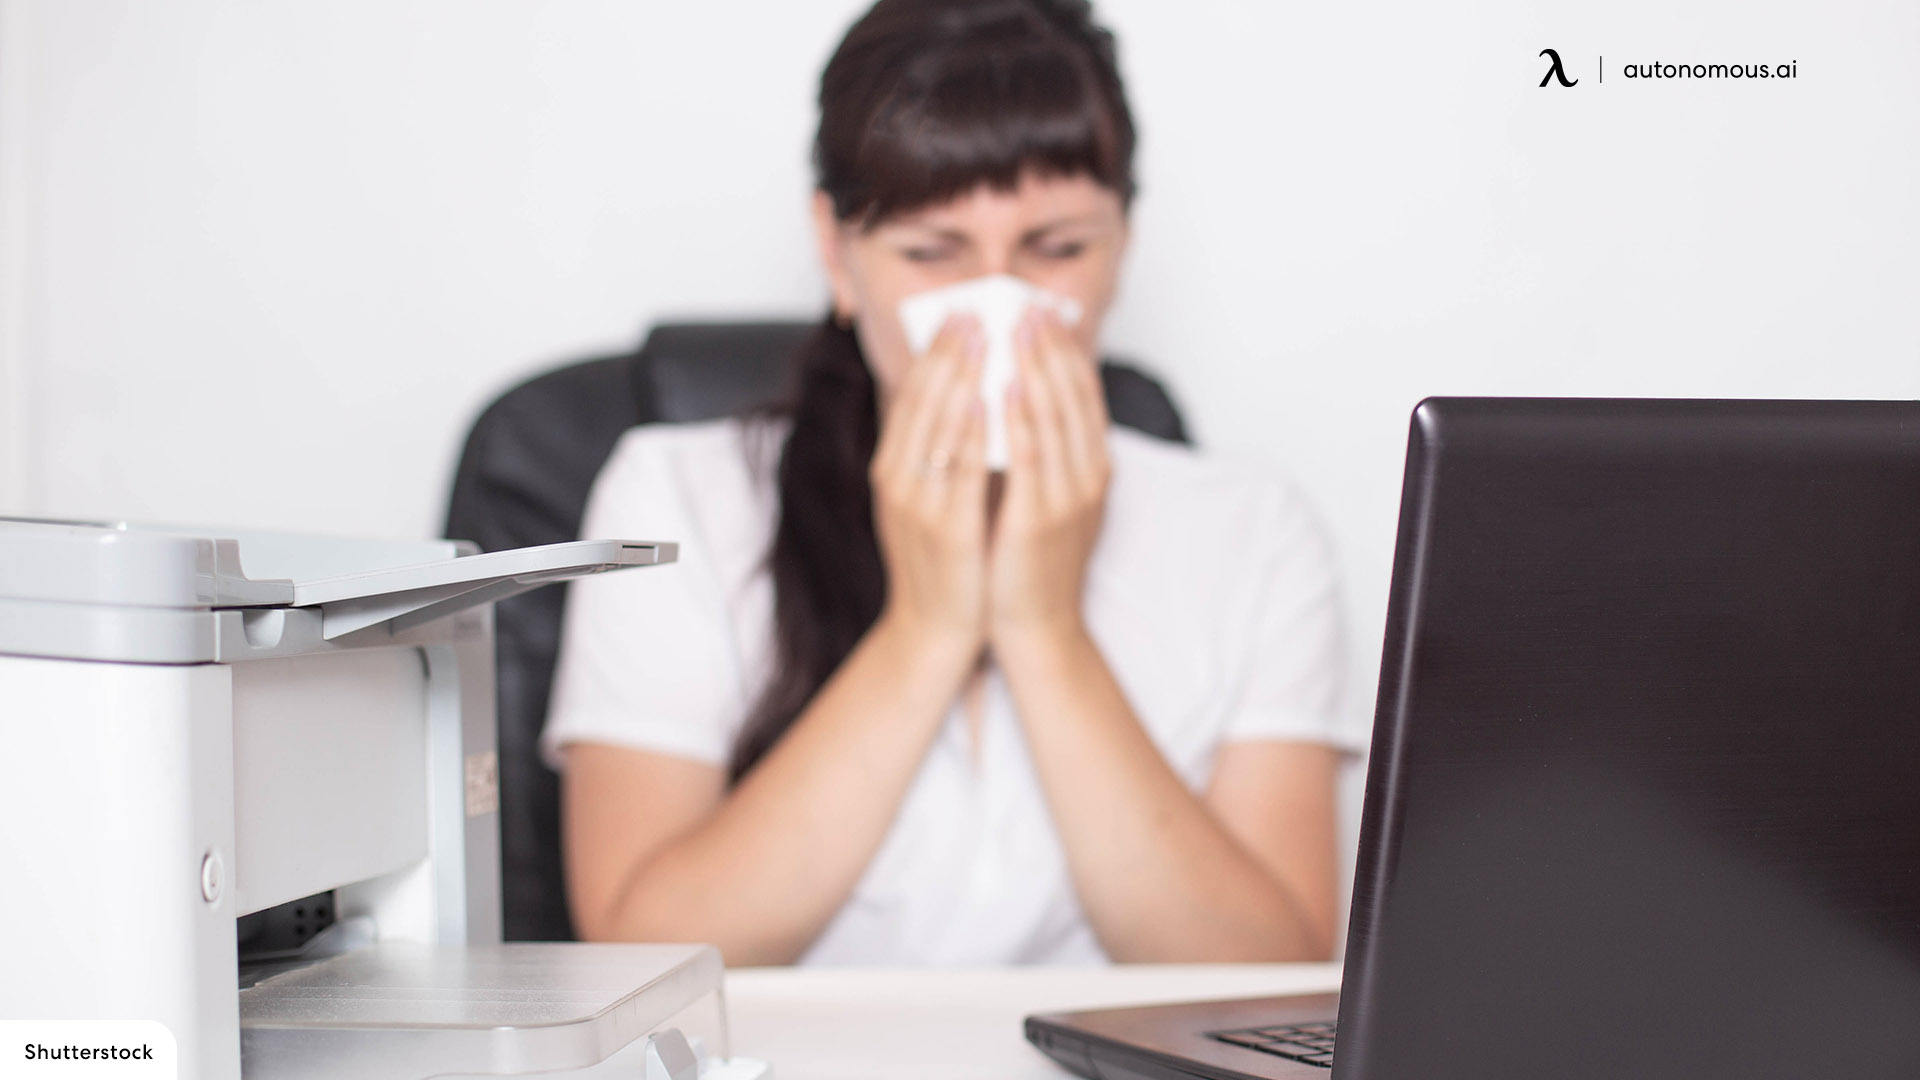 How to Reduce Dust Allergies at Work